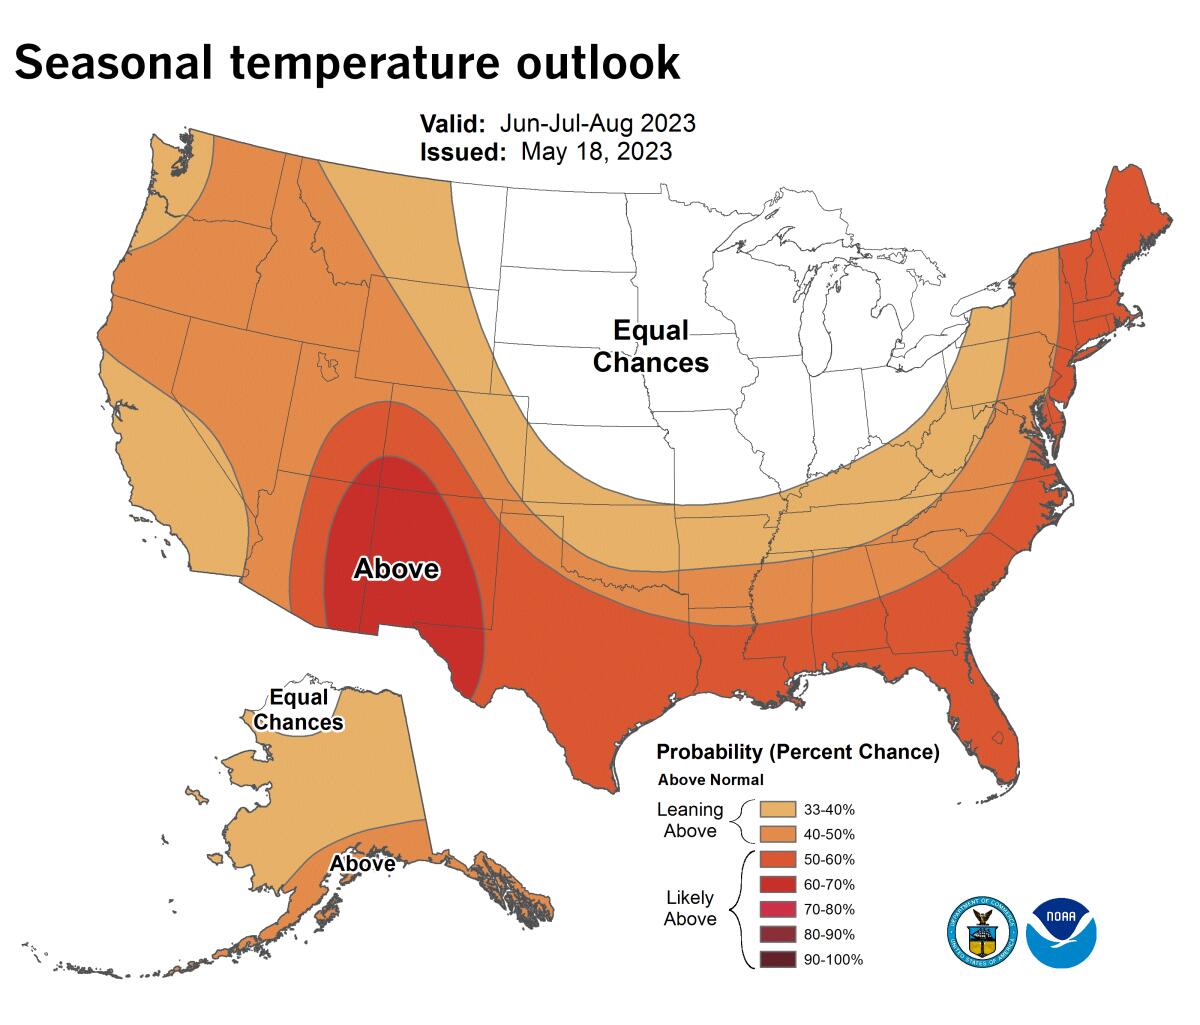 Seasonal temperature outlook map showing higher than normal temperatures in most of the  U.S.